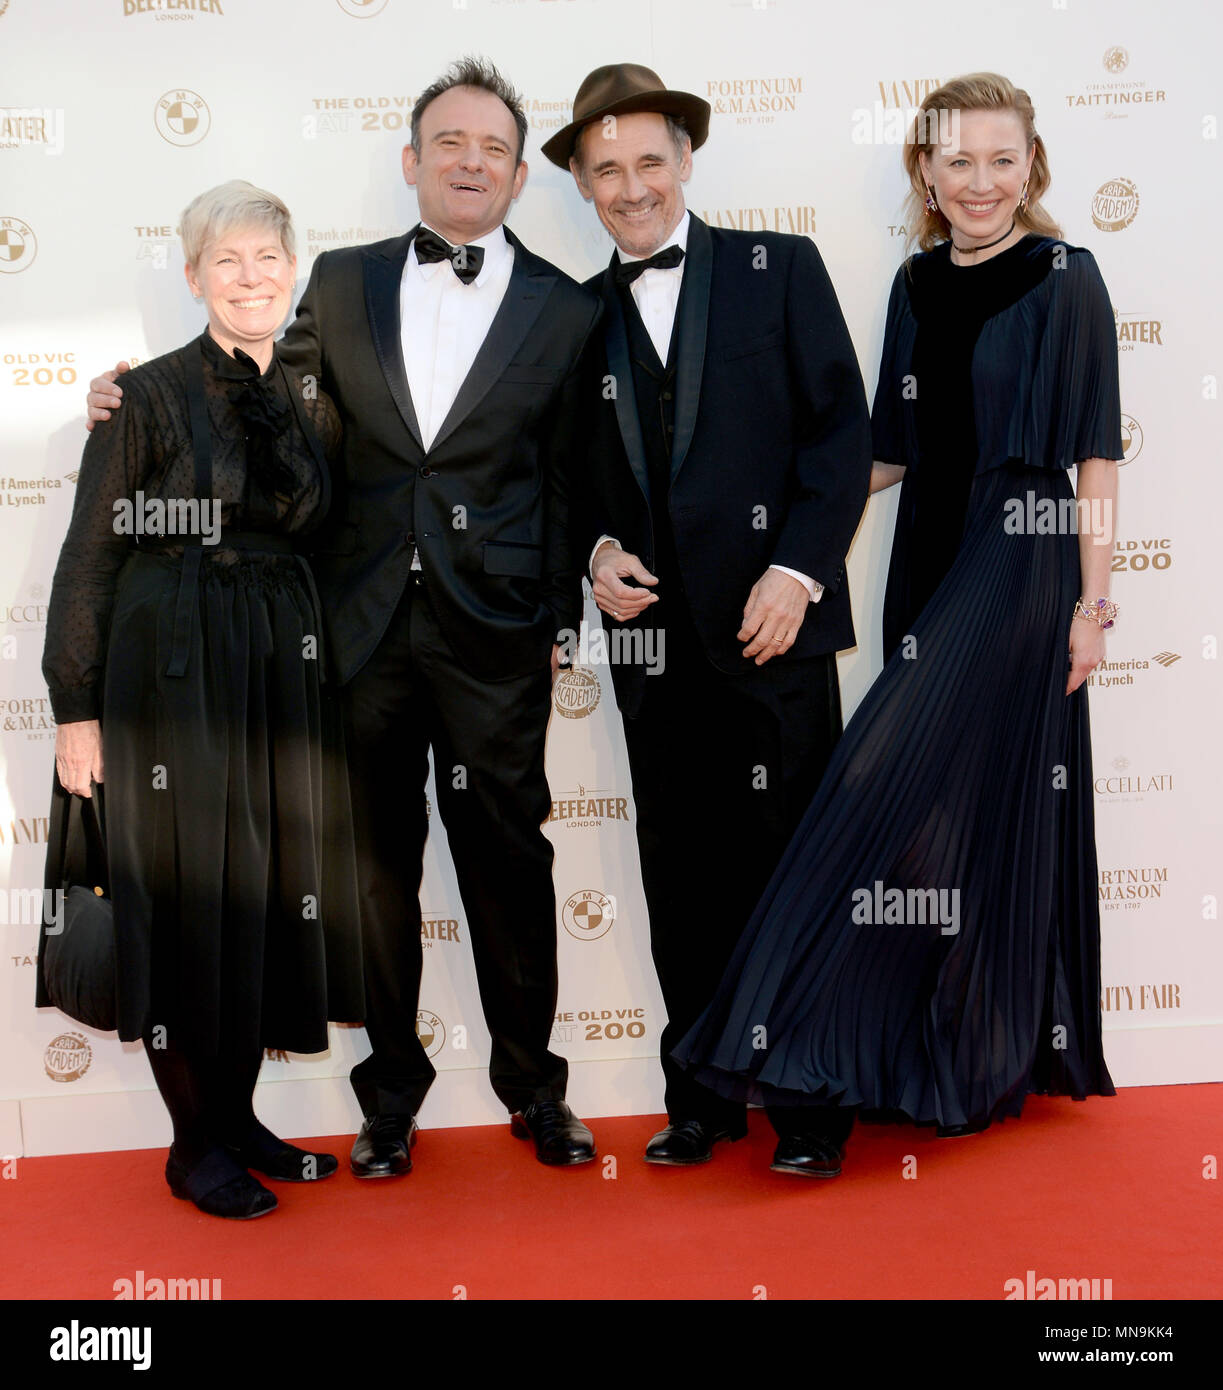 Photo Must Be Credited ©Alpha Press 078237 13/05/2018 Claire Van Kampen, Matthew Warchus, Mark Rylance and Juliet Rylance at The Old Vic Bicentenary Ball held at The Old Vic Theatre in London Stock Photo